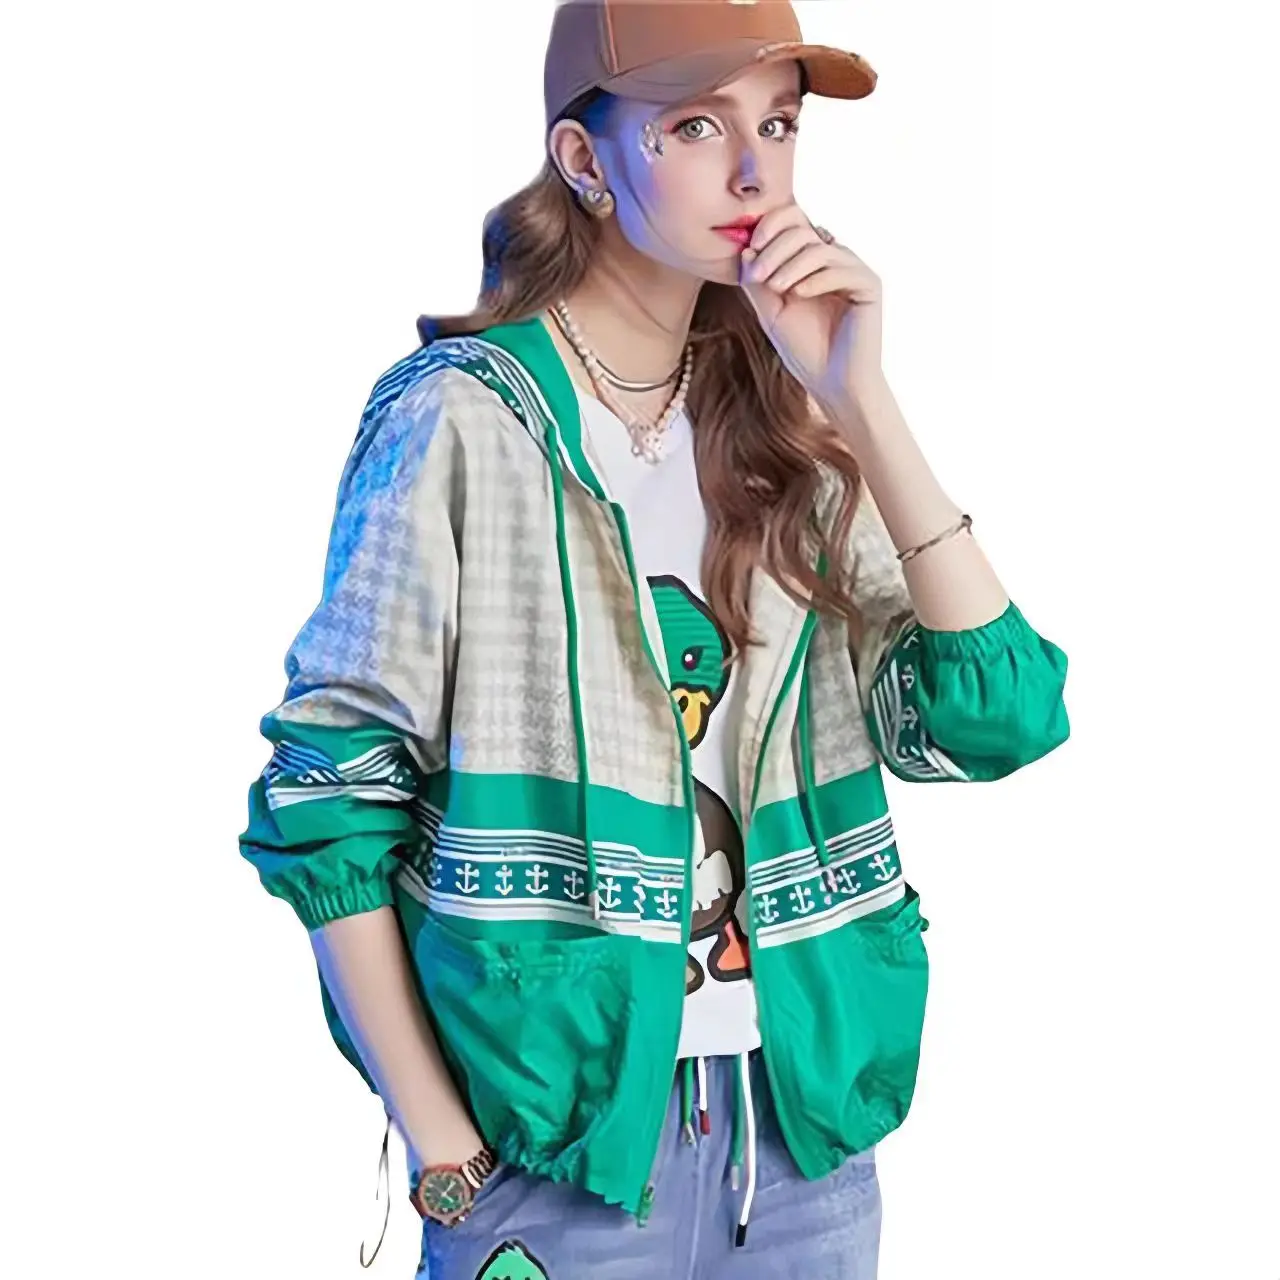 Women's England Style Hooded Jacket, Print Doodle Coats, Casual Loose Outerwear, Female Clothing Tops, Spring, Summer, New